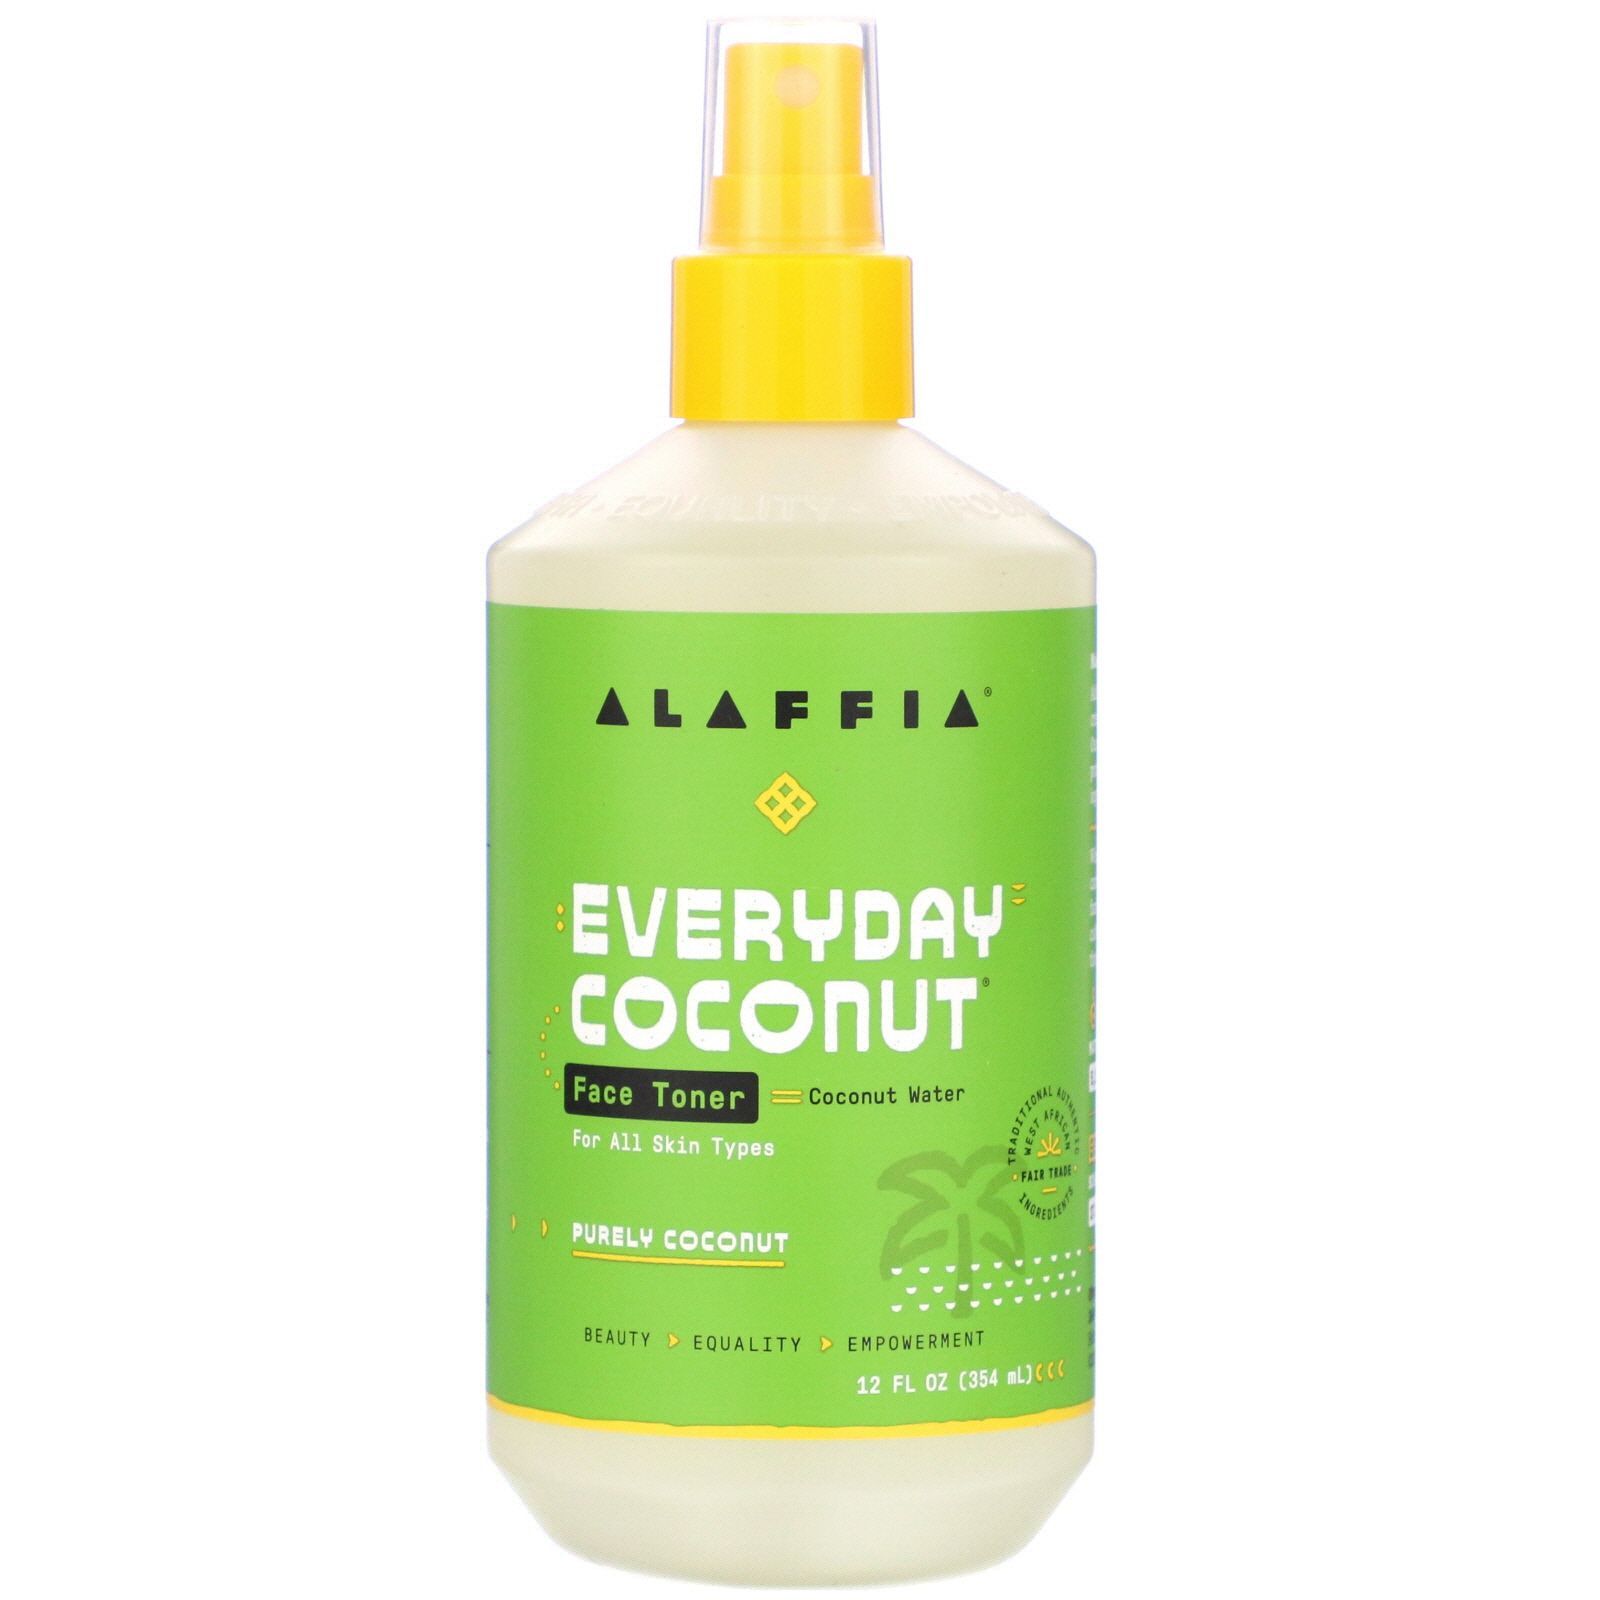 Everyday Coconut Face Toner